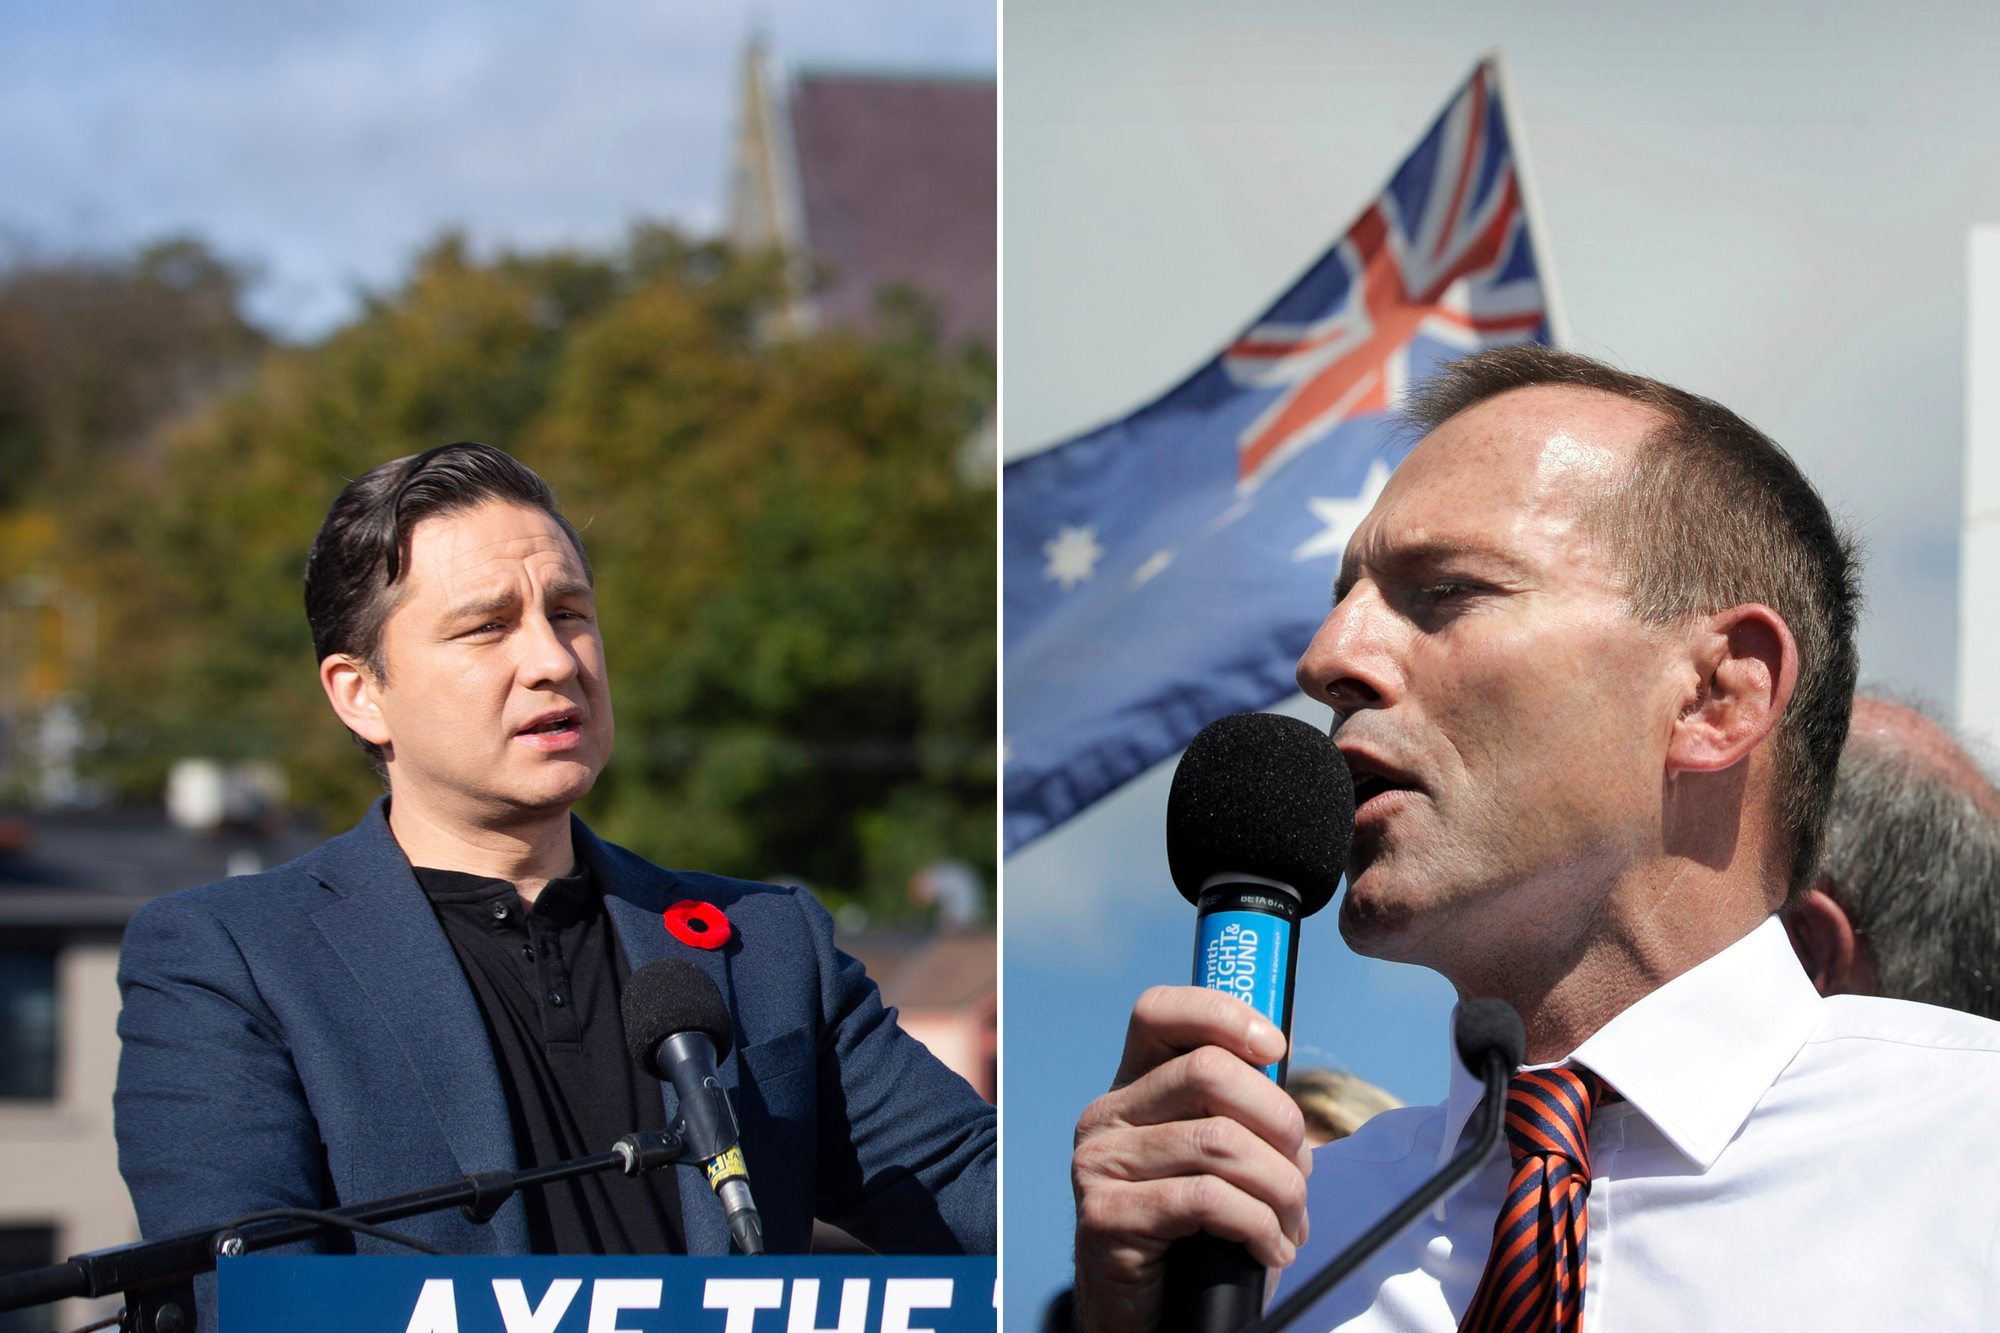 L: Pierre Poilievre gives a speech behind an Axe the Tax podium. R: Tony Abbott talks to a crowd with Australian flags.